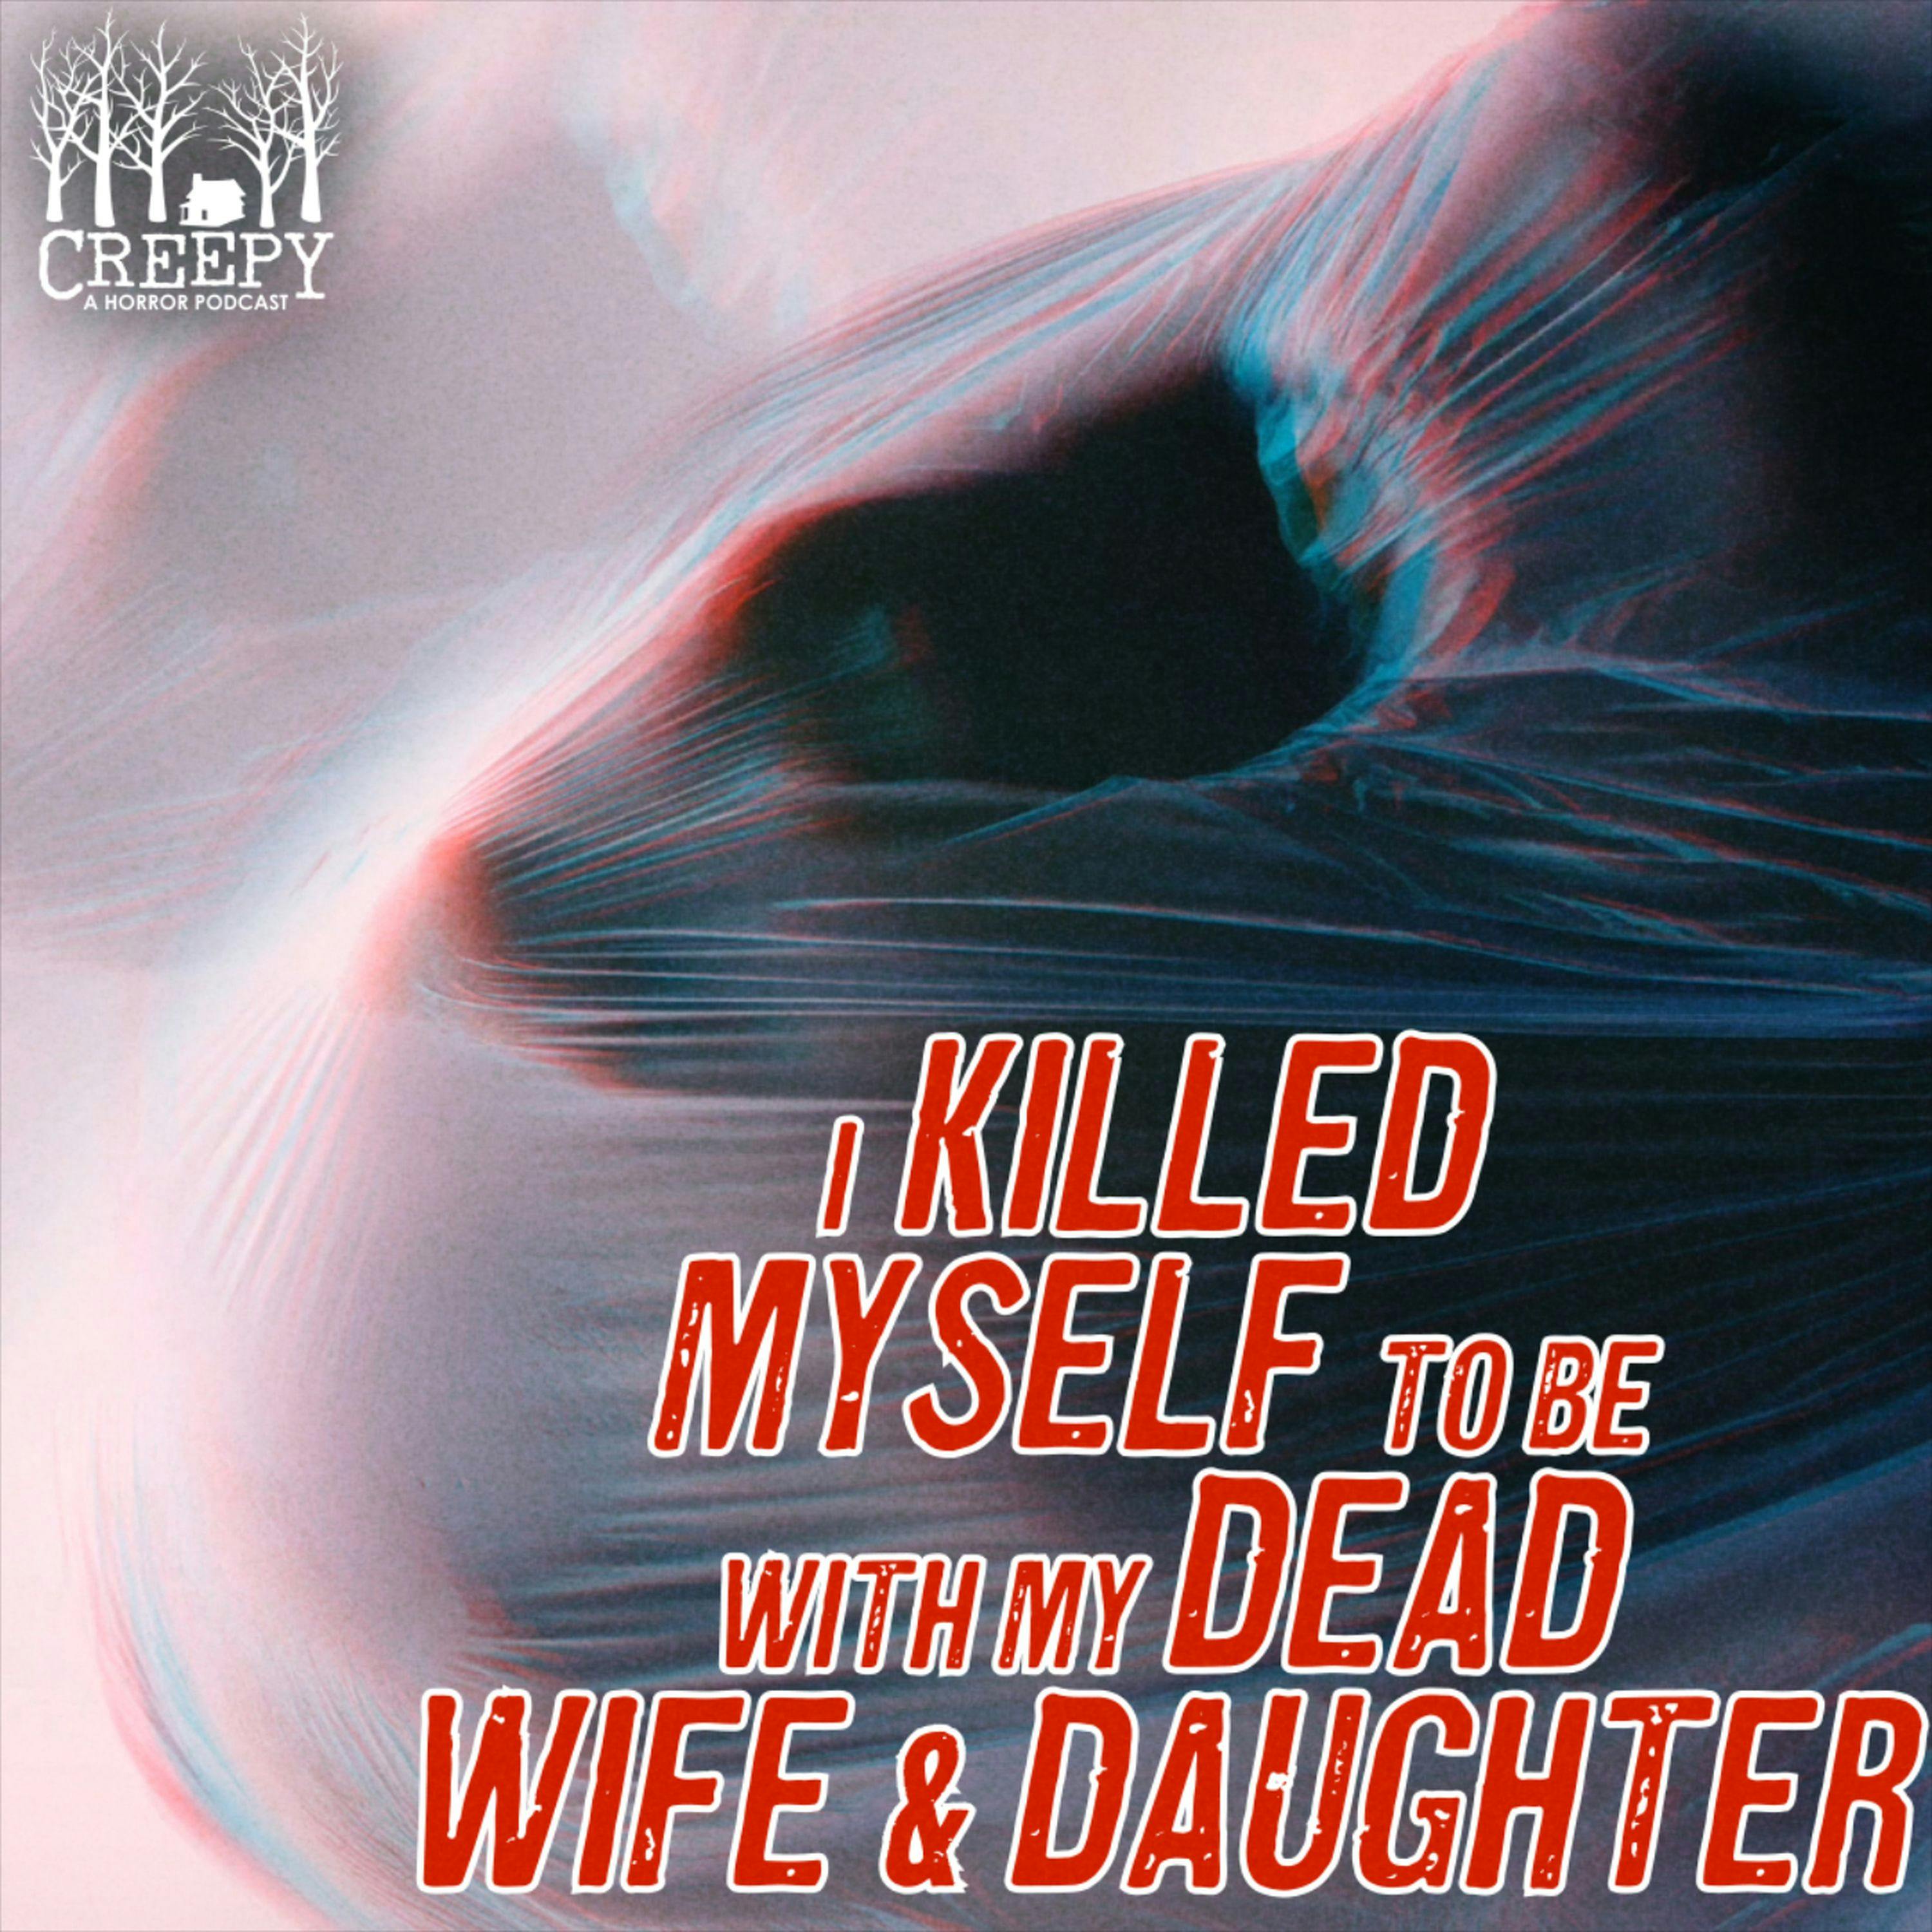 I Killed Myself to be With My Dead Wife & Daughter